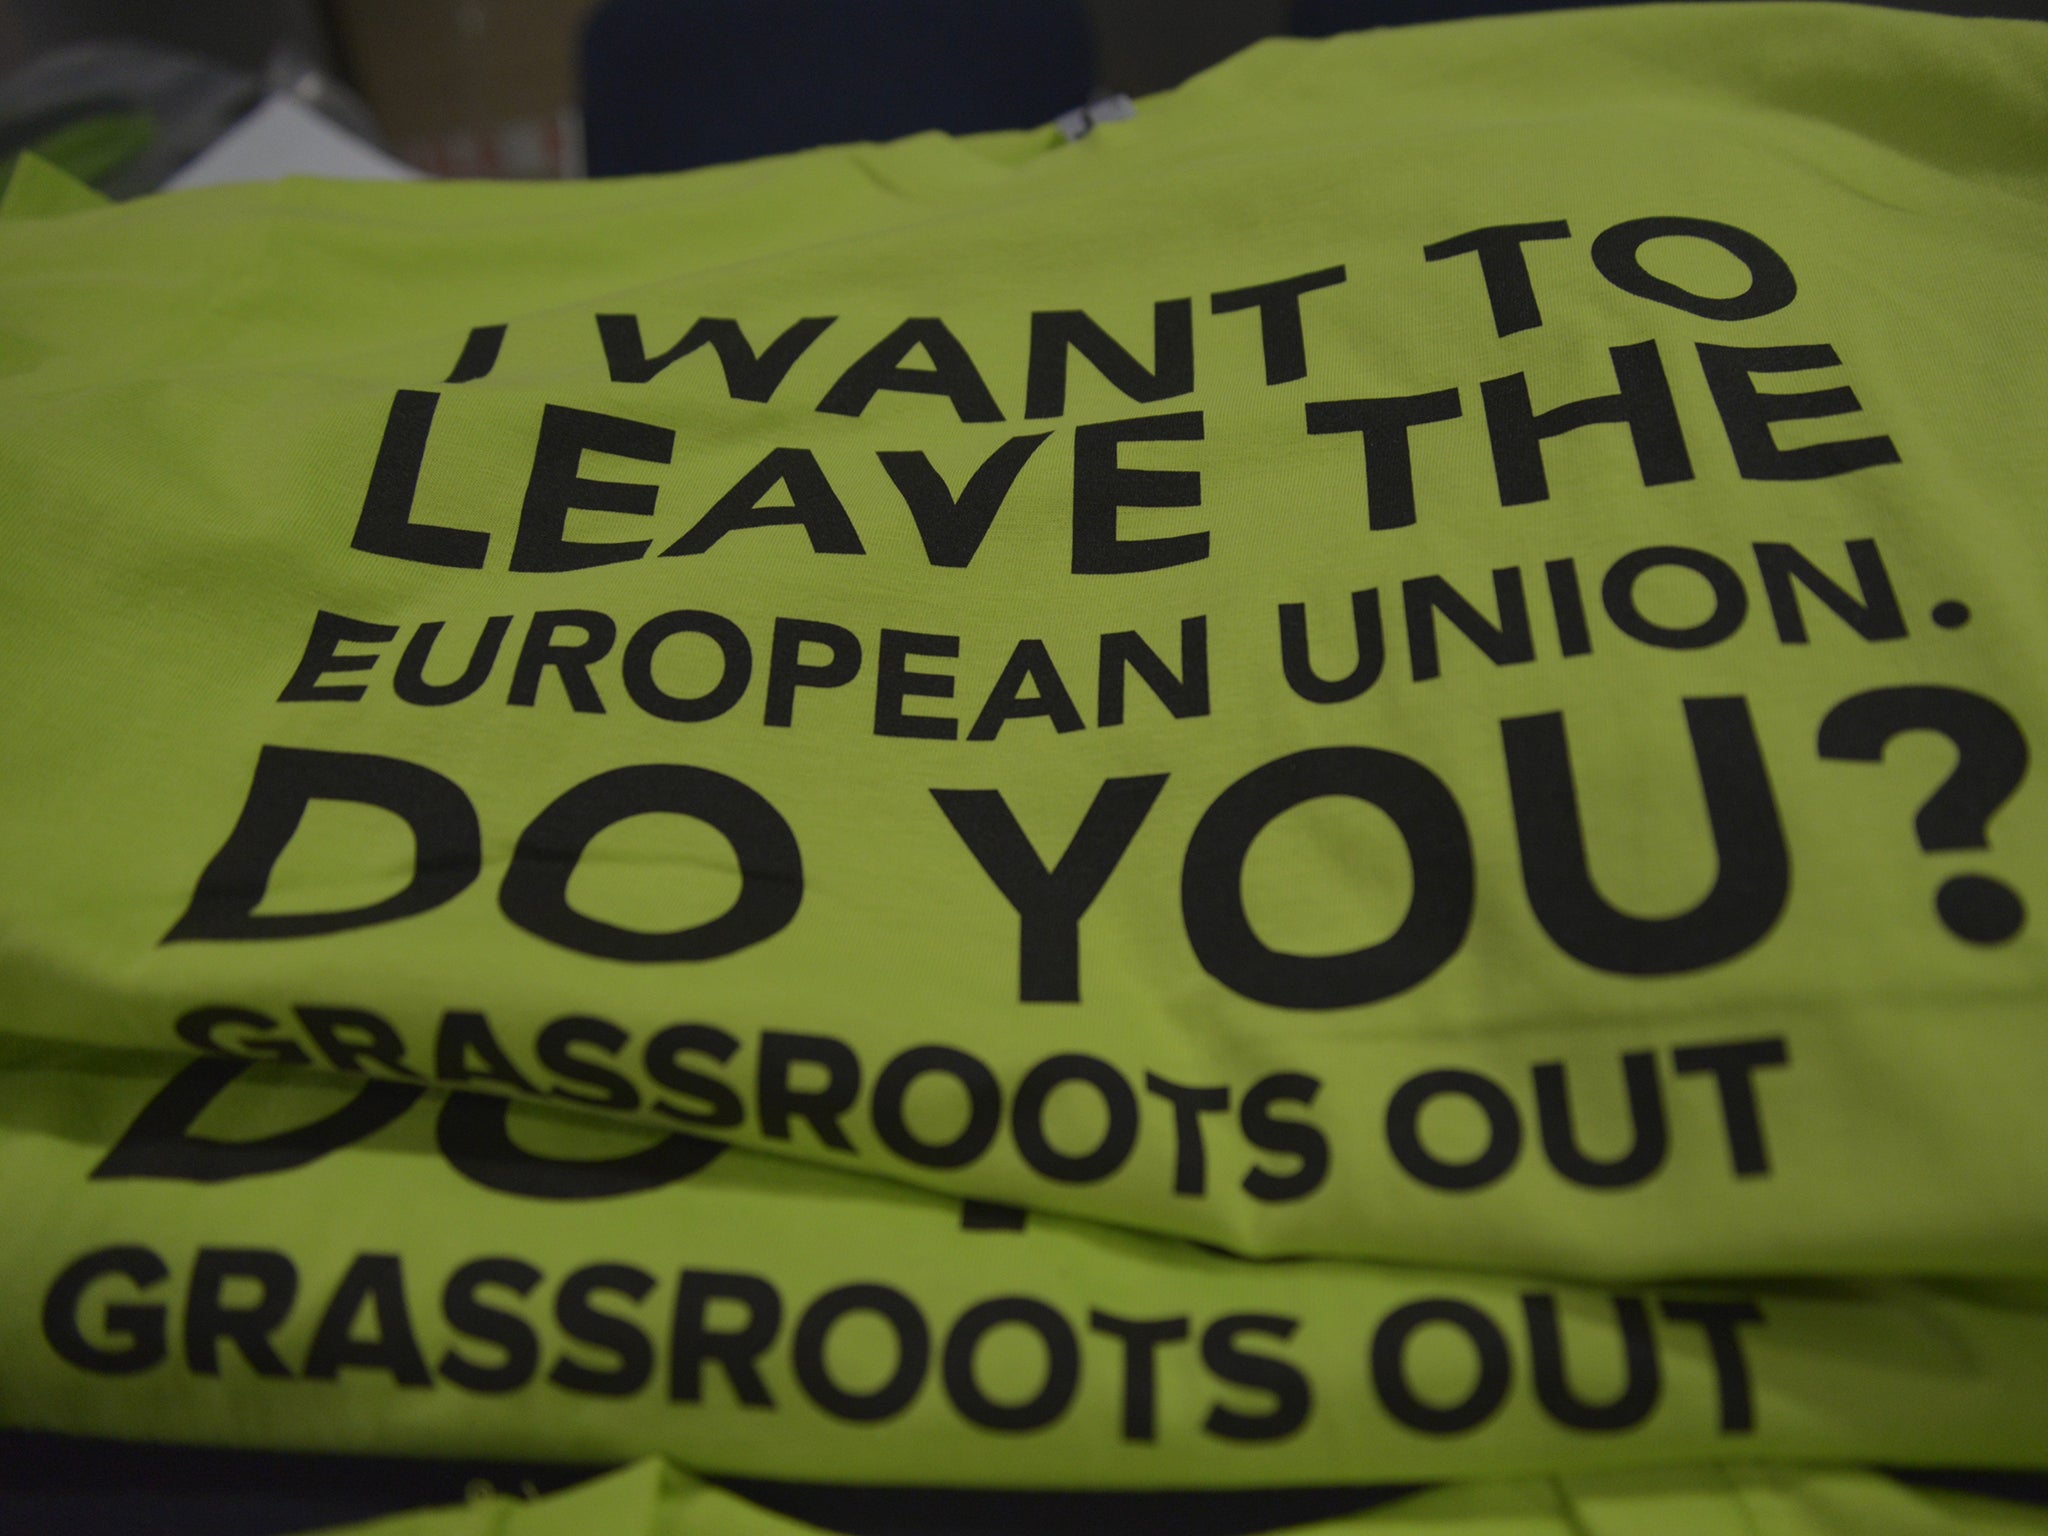 Campaign t-shirts on sale at the Grassroots Out event in Manchester.